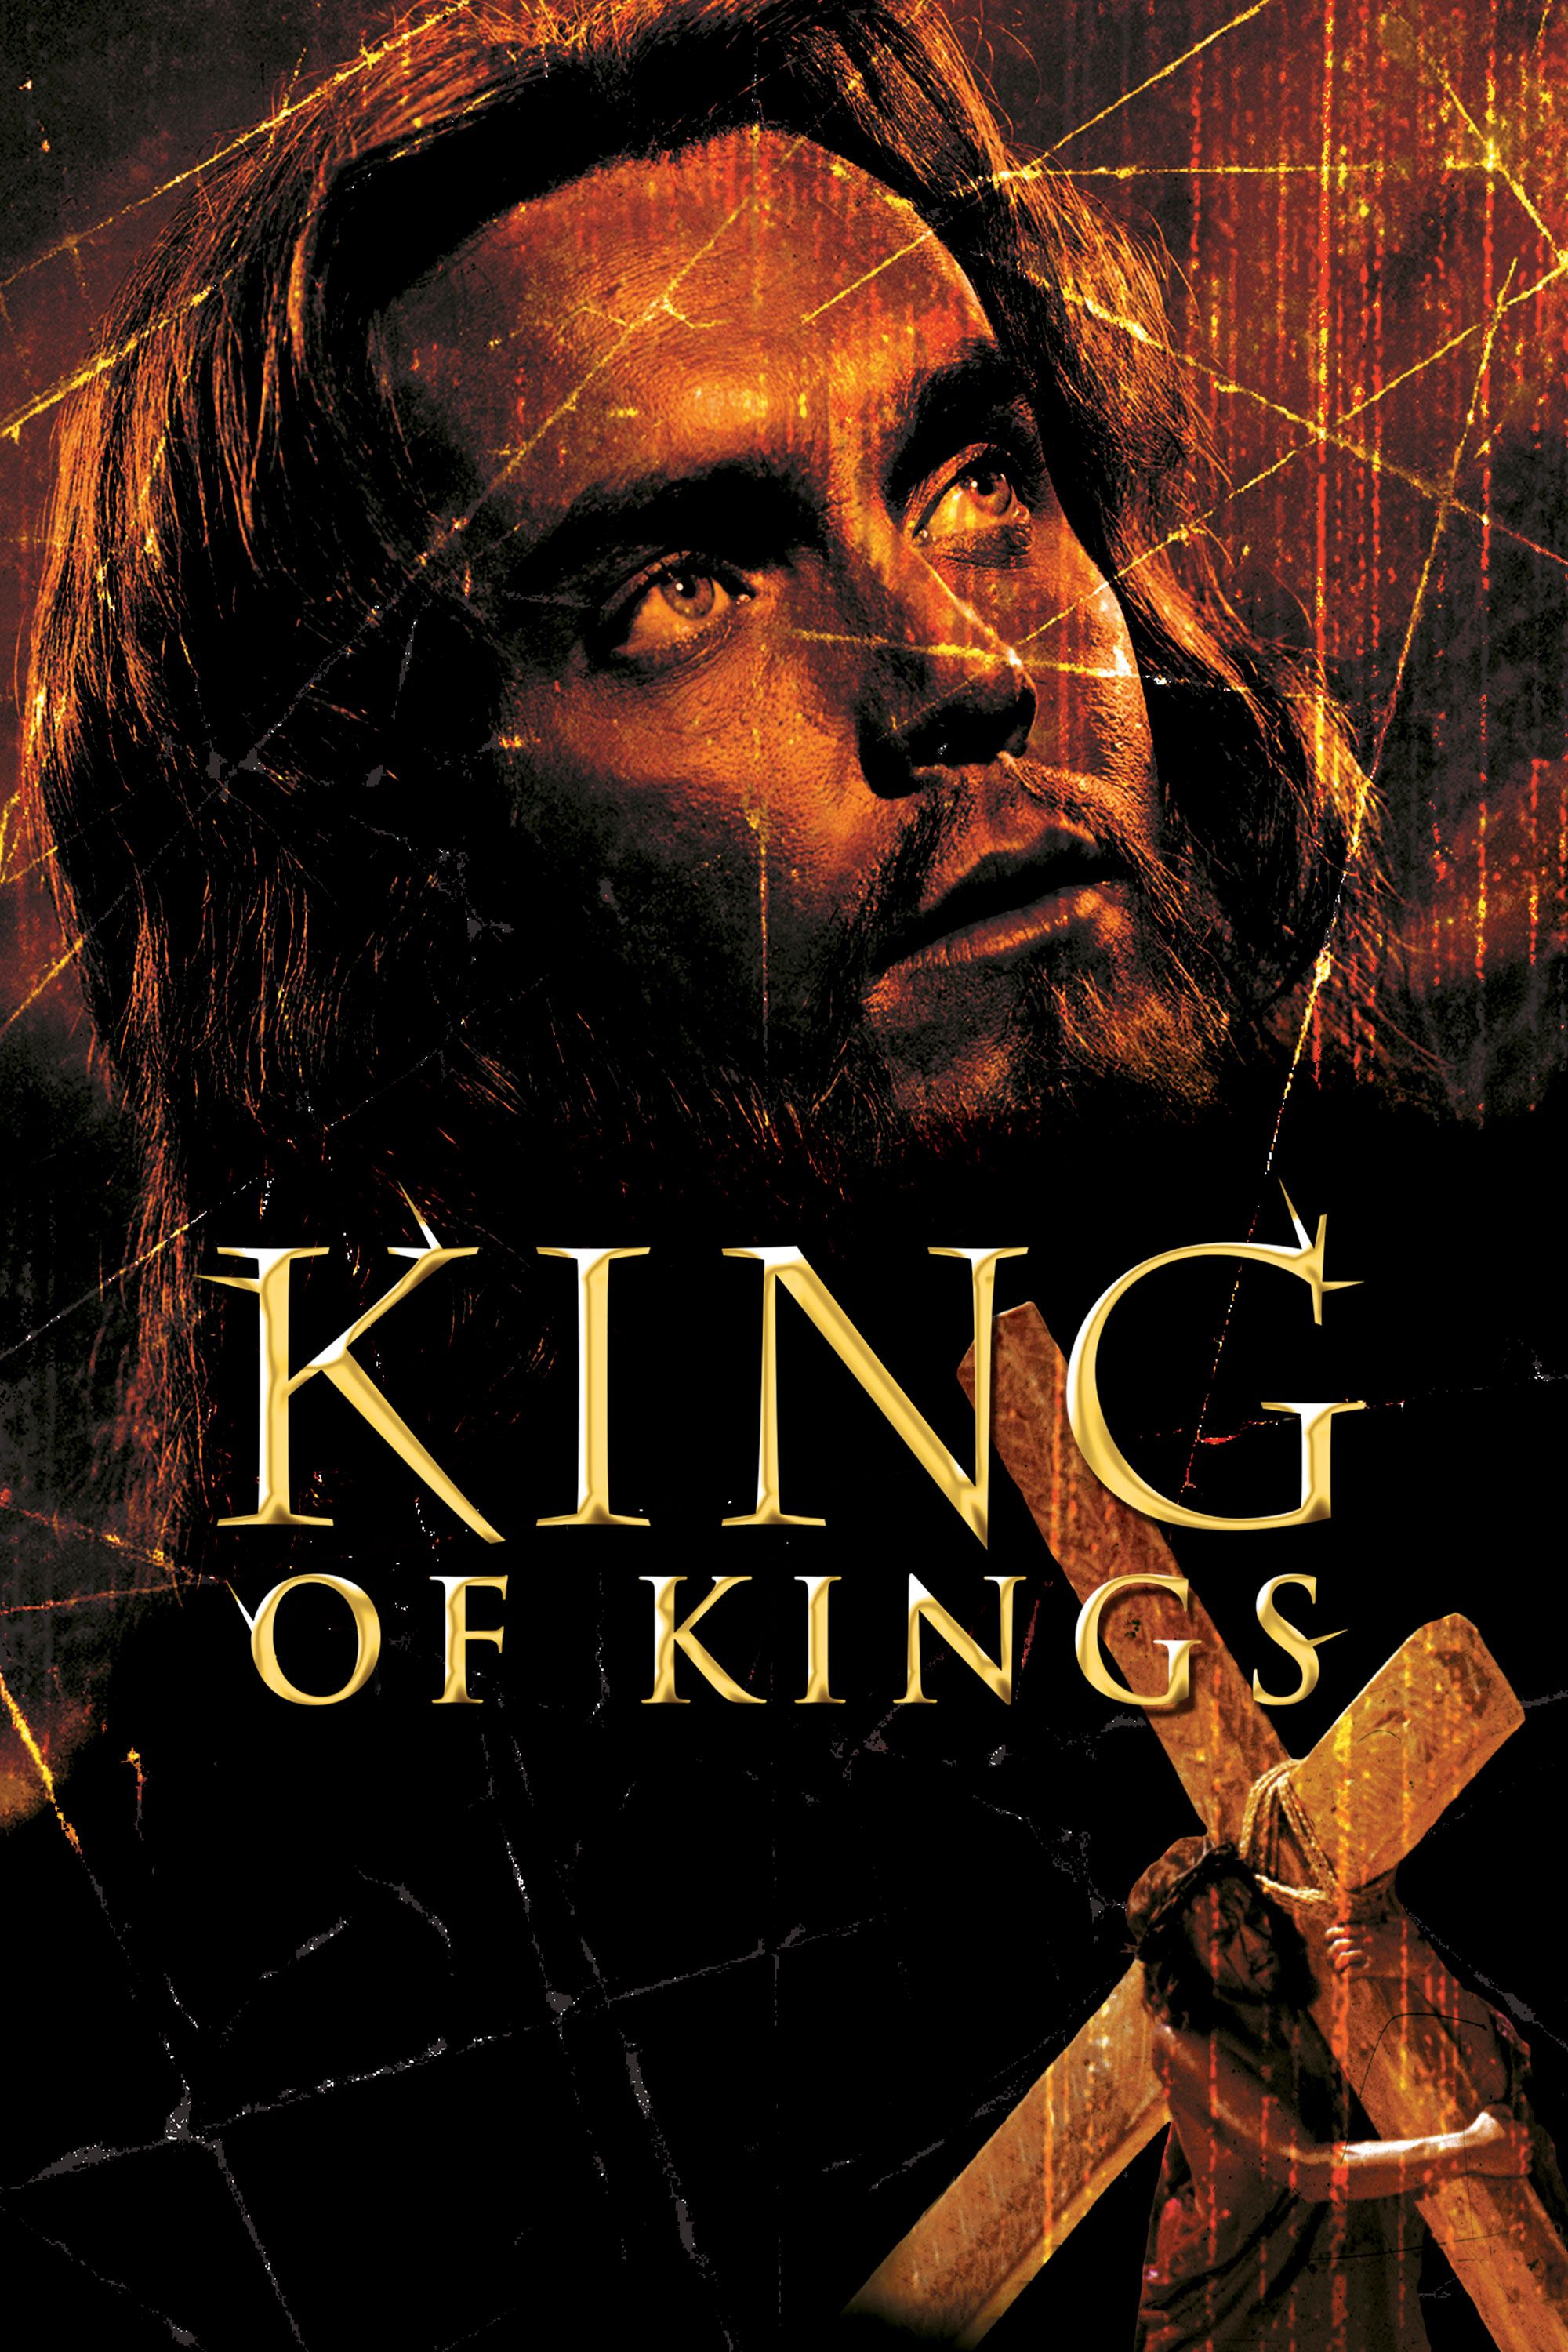 you tube the passion of christ full movie